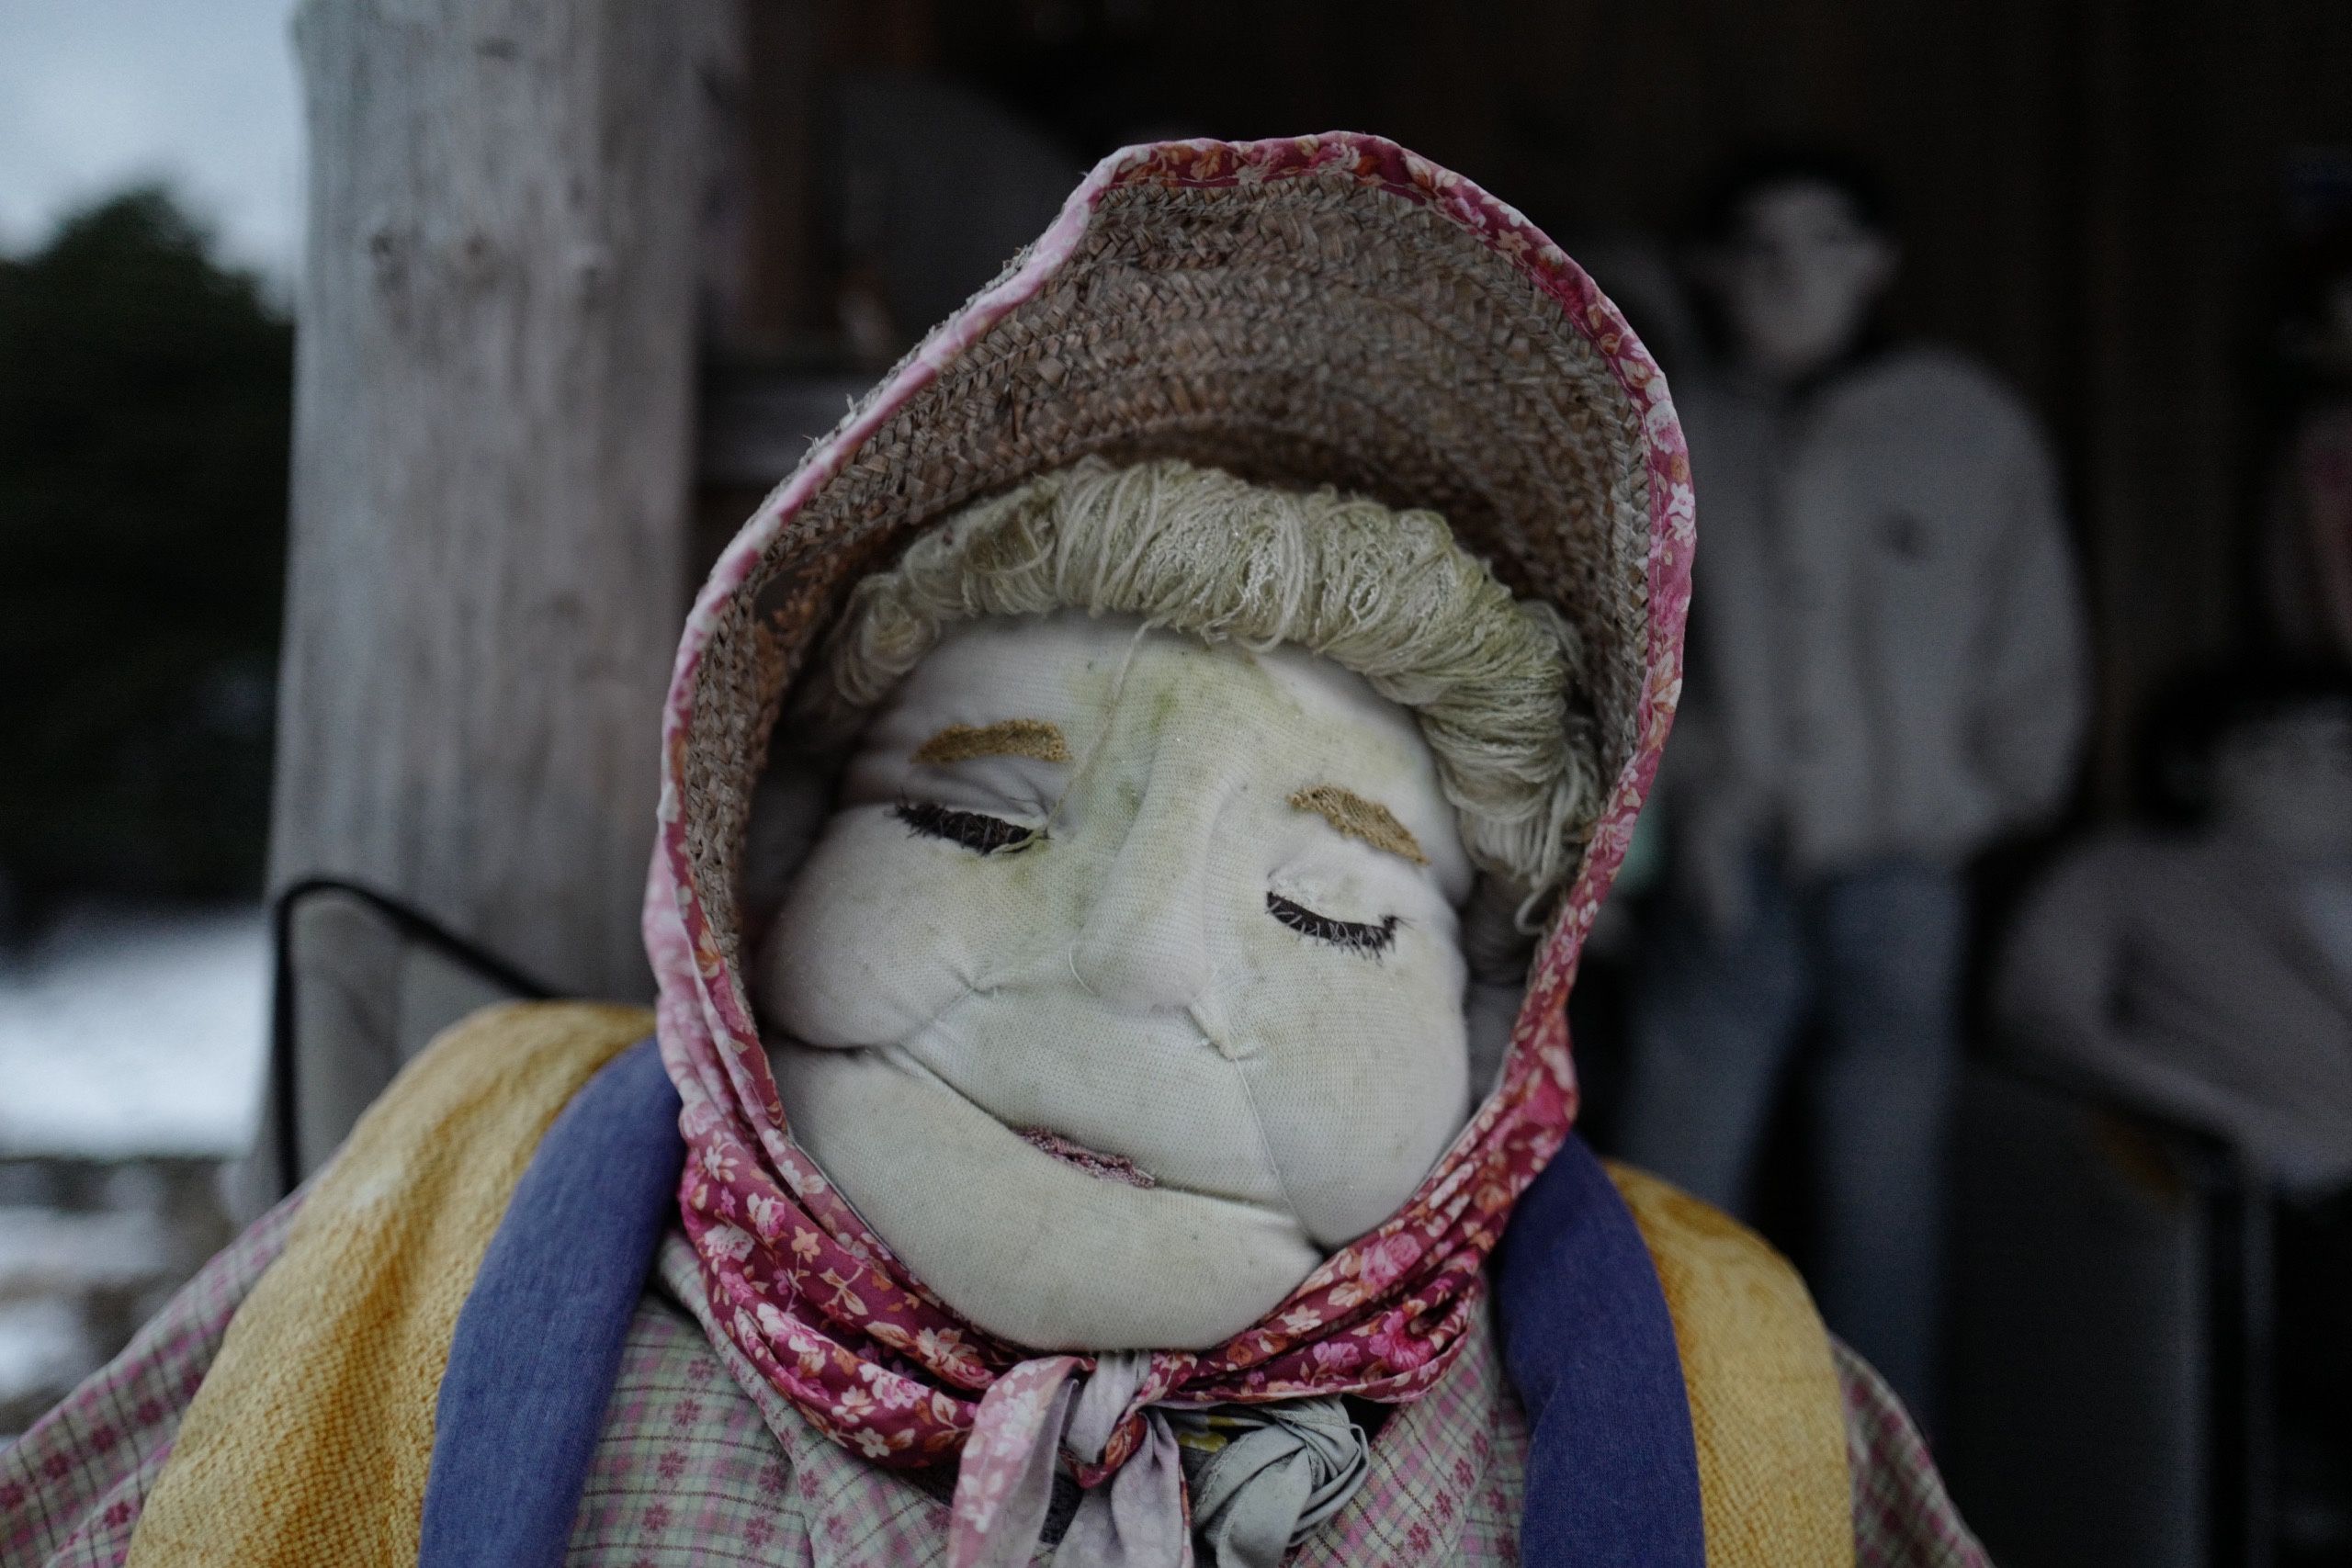 Closeup of another similar doll, this one with the features of an older woman wearing a straw cap and a scarf.